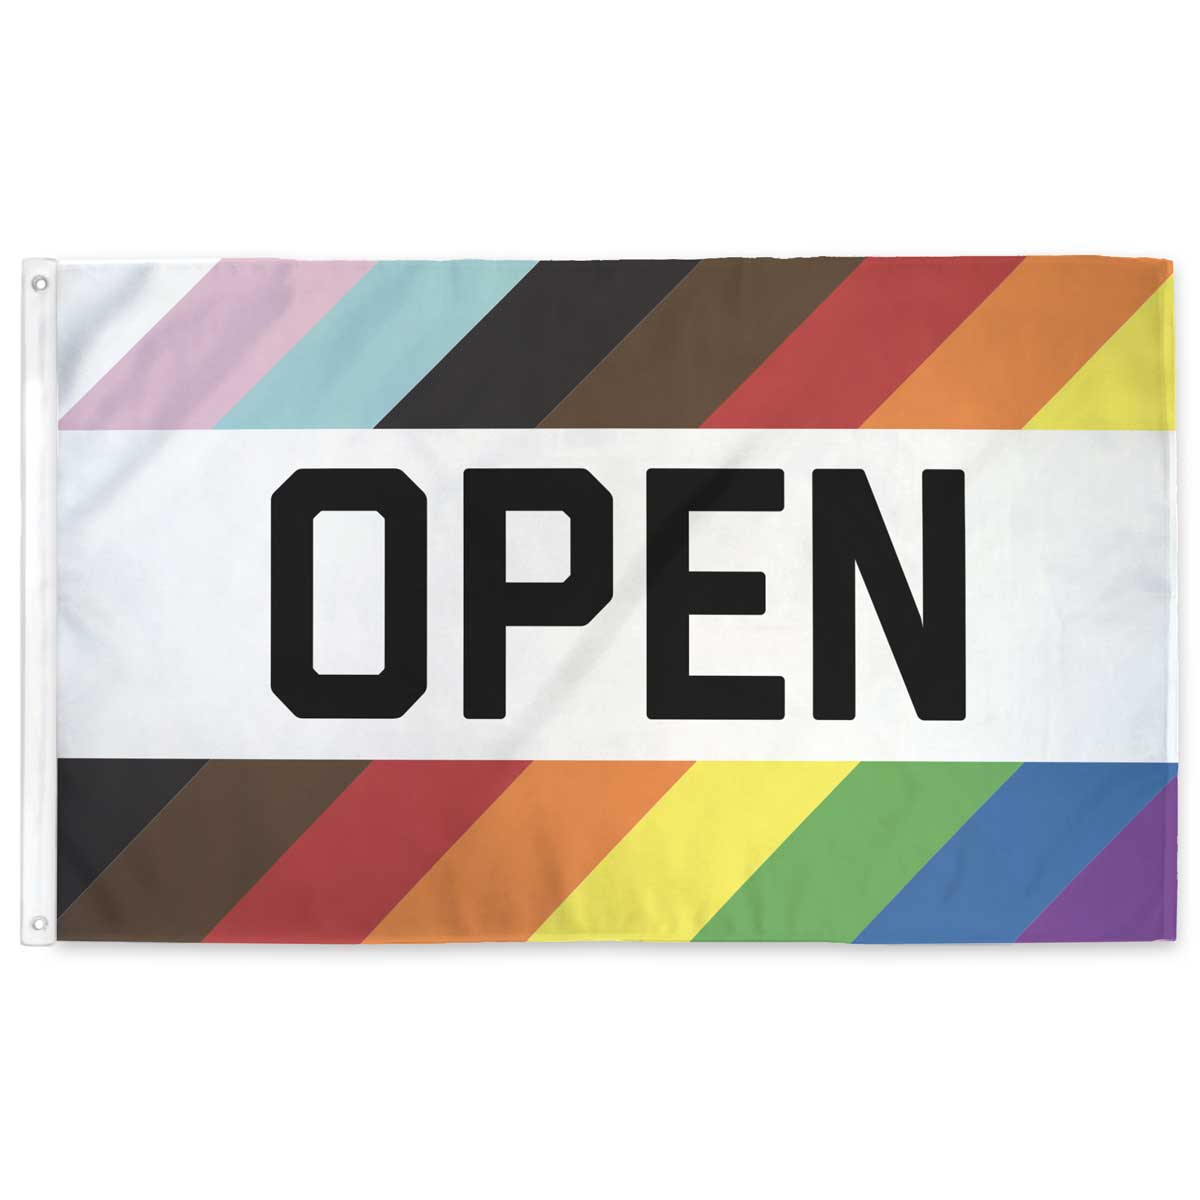 LGBTQ+ Rainbow OPEN Flag - 3ft x 5ft outdoor flag ready for small business